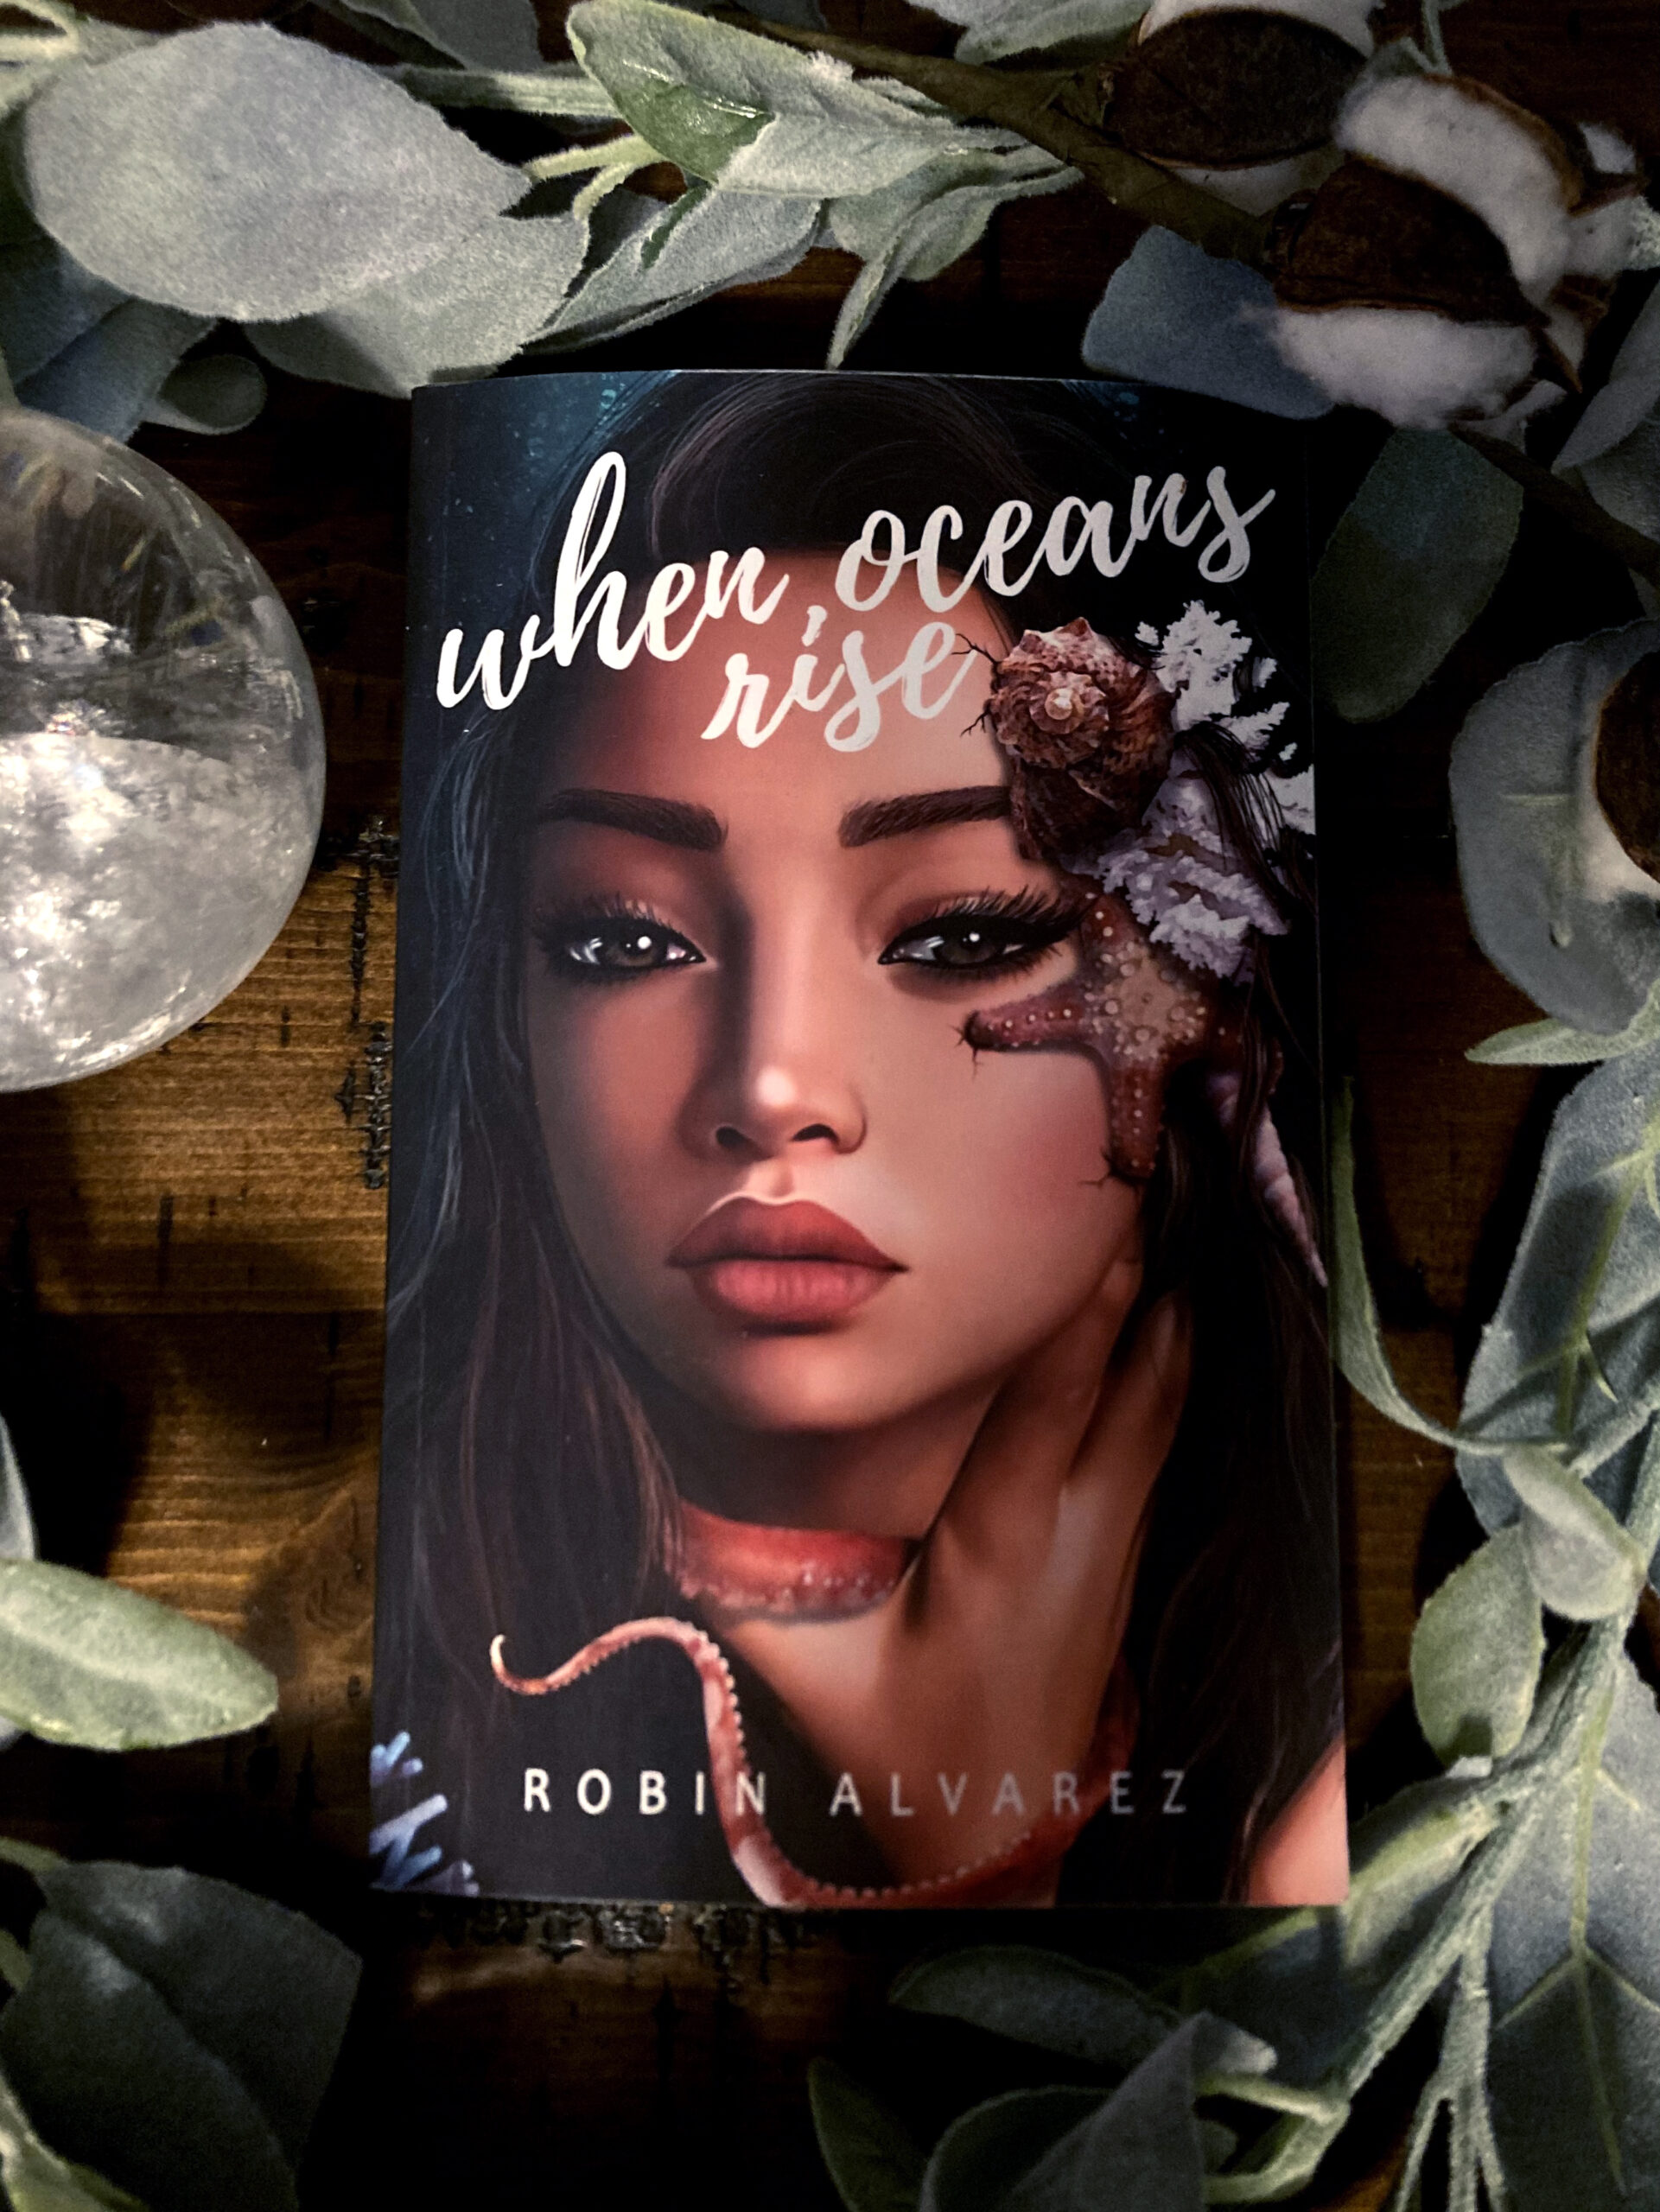 Not the Mermaid or Monster You Knew, a guest post by author Robin Alvarez